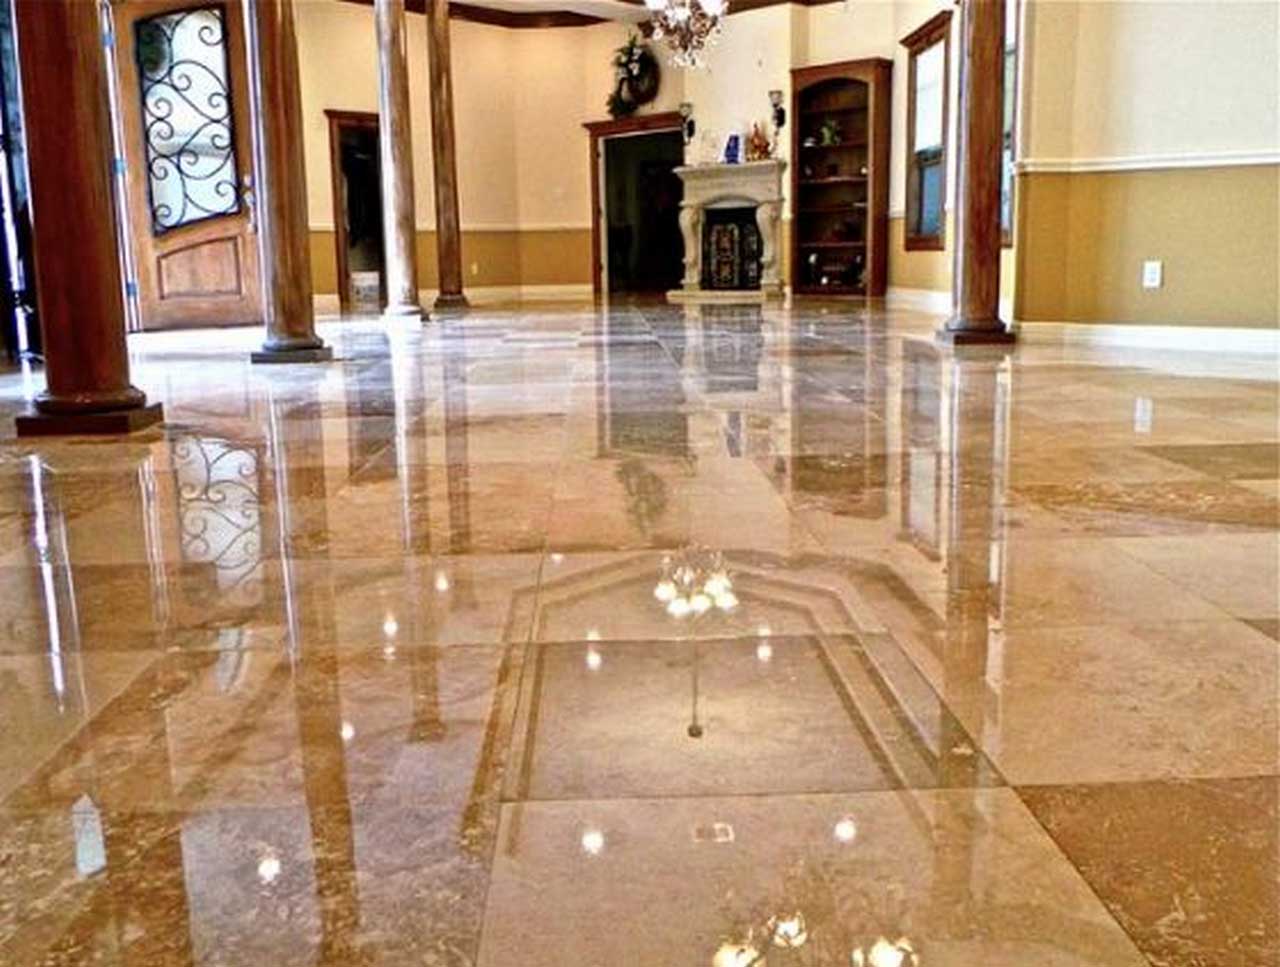 Carpet Cleaning Service? Why Not! Featuring Granite and Marble Floor Polish Guide | Roy Home Design